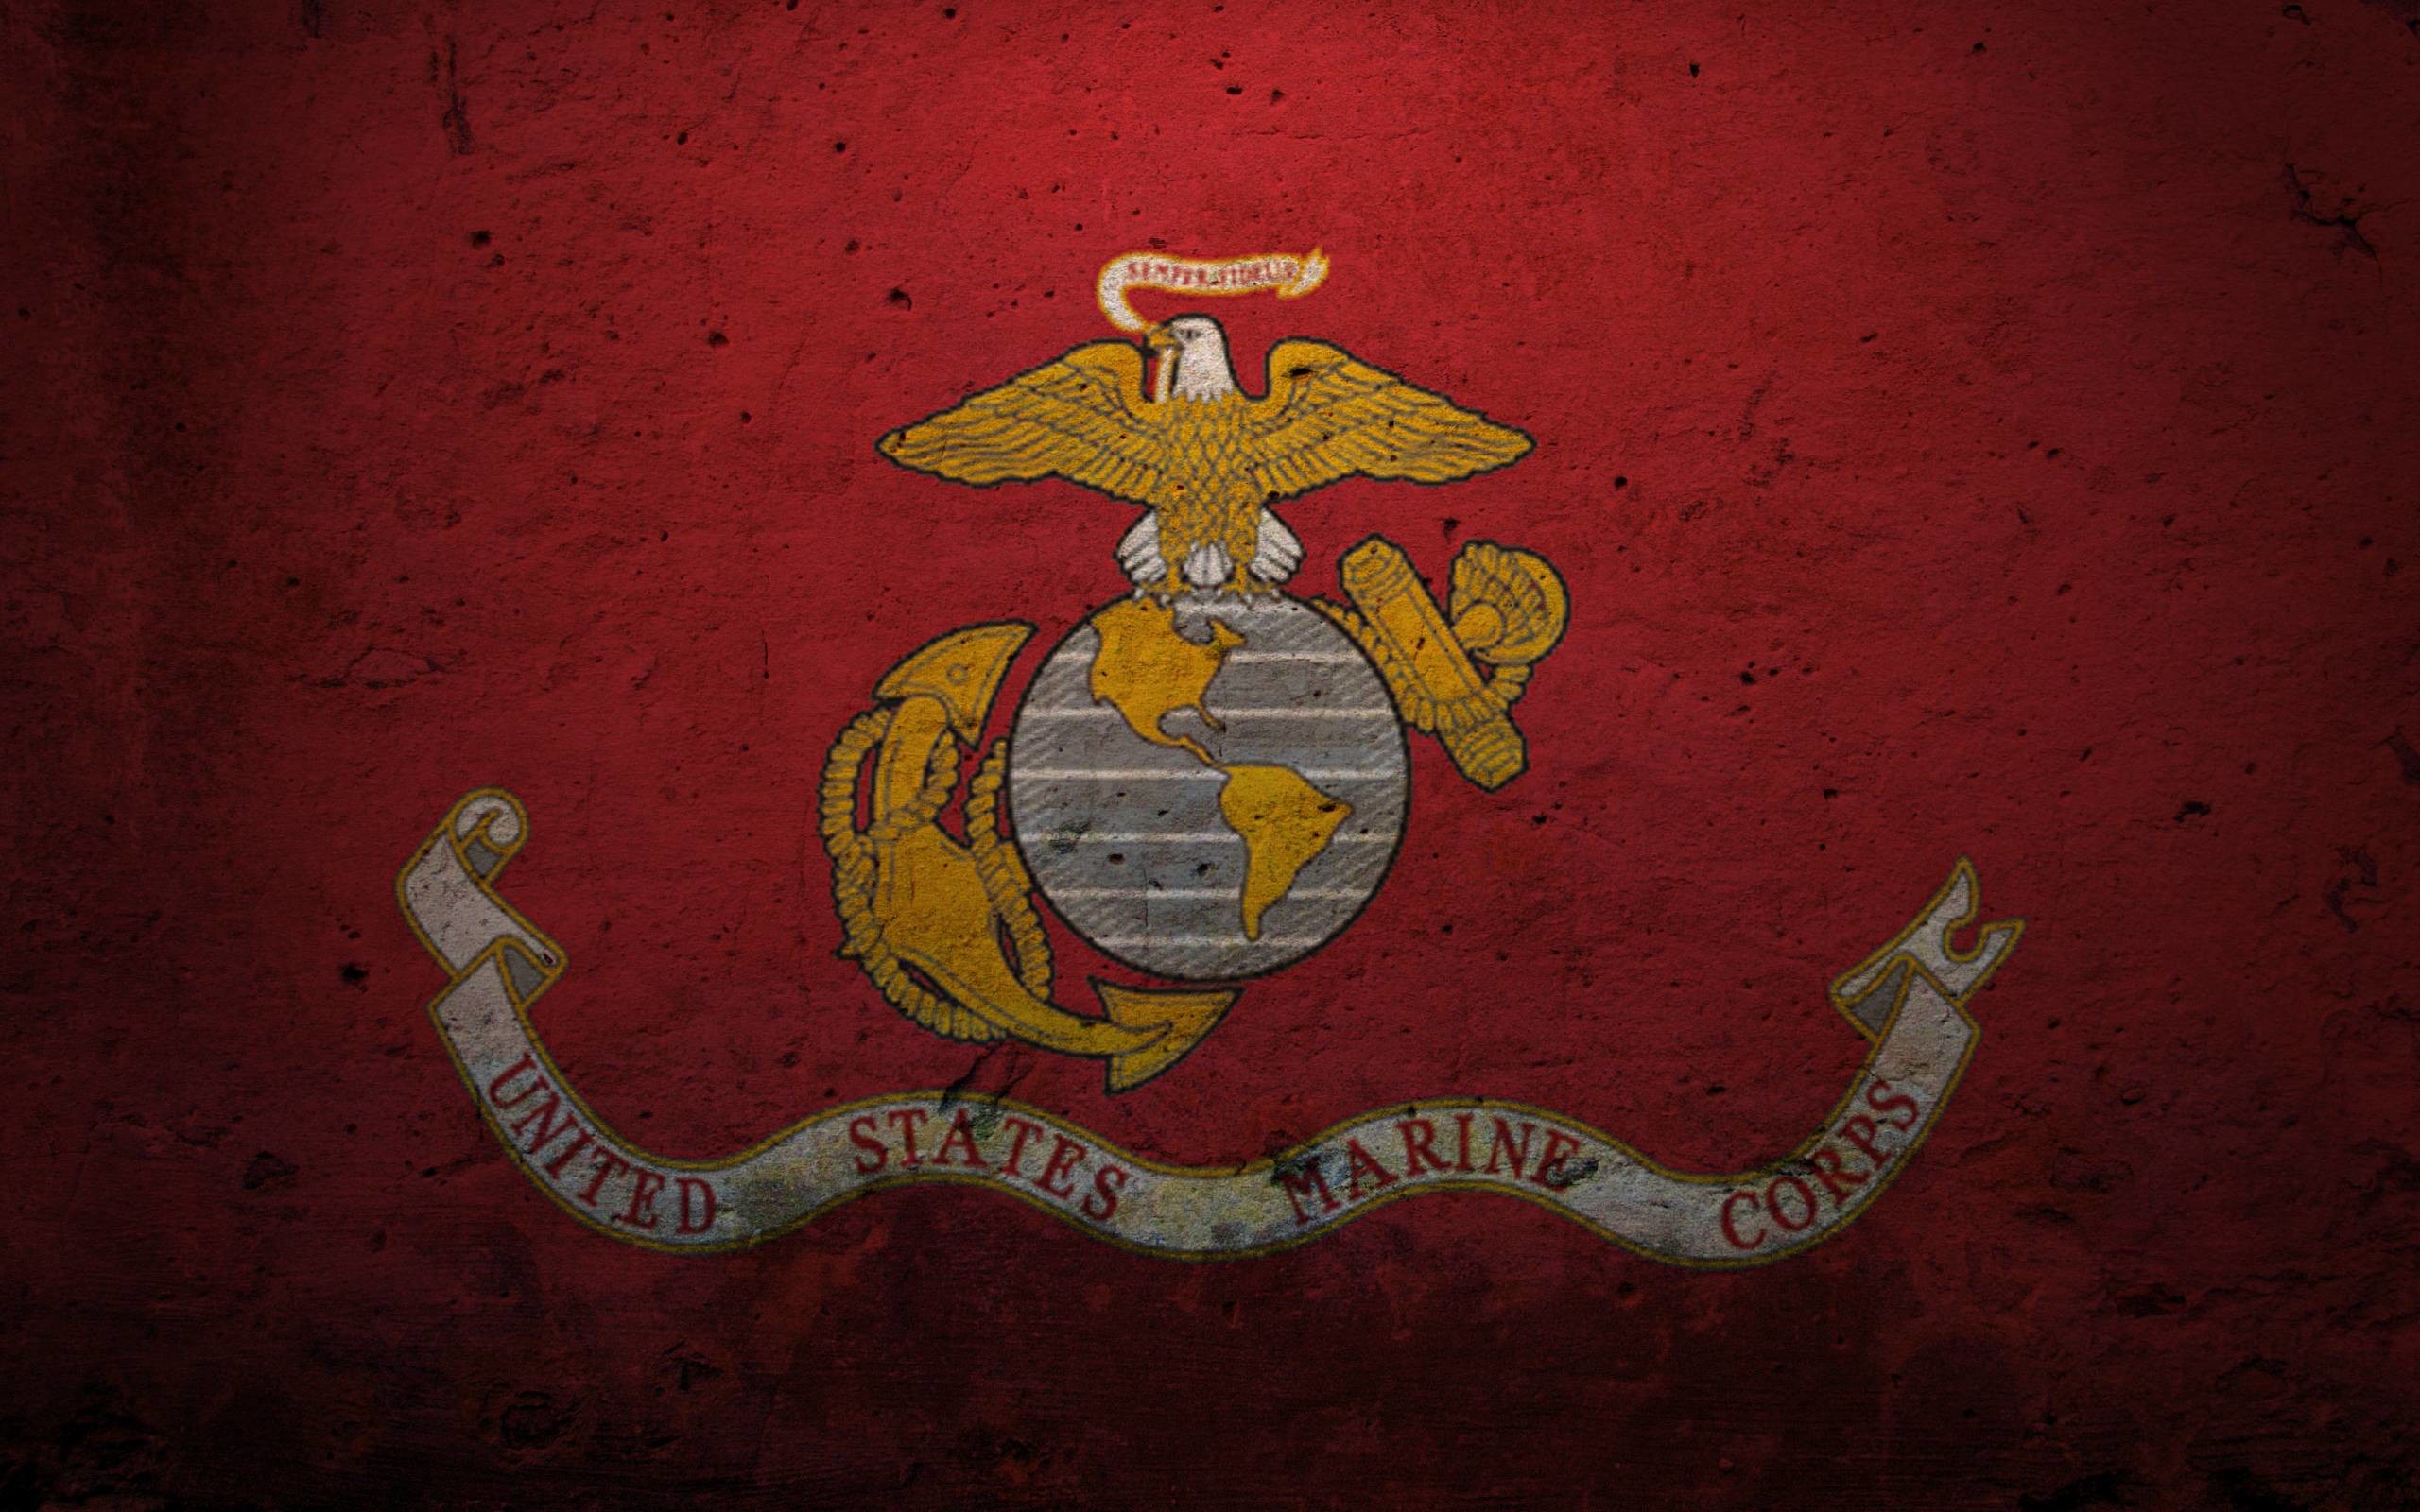 2560x1600 United States Marine Corps Wallpapers - Wallpaper Cave